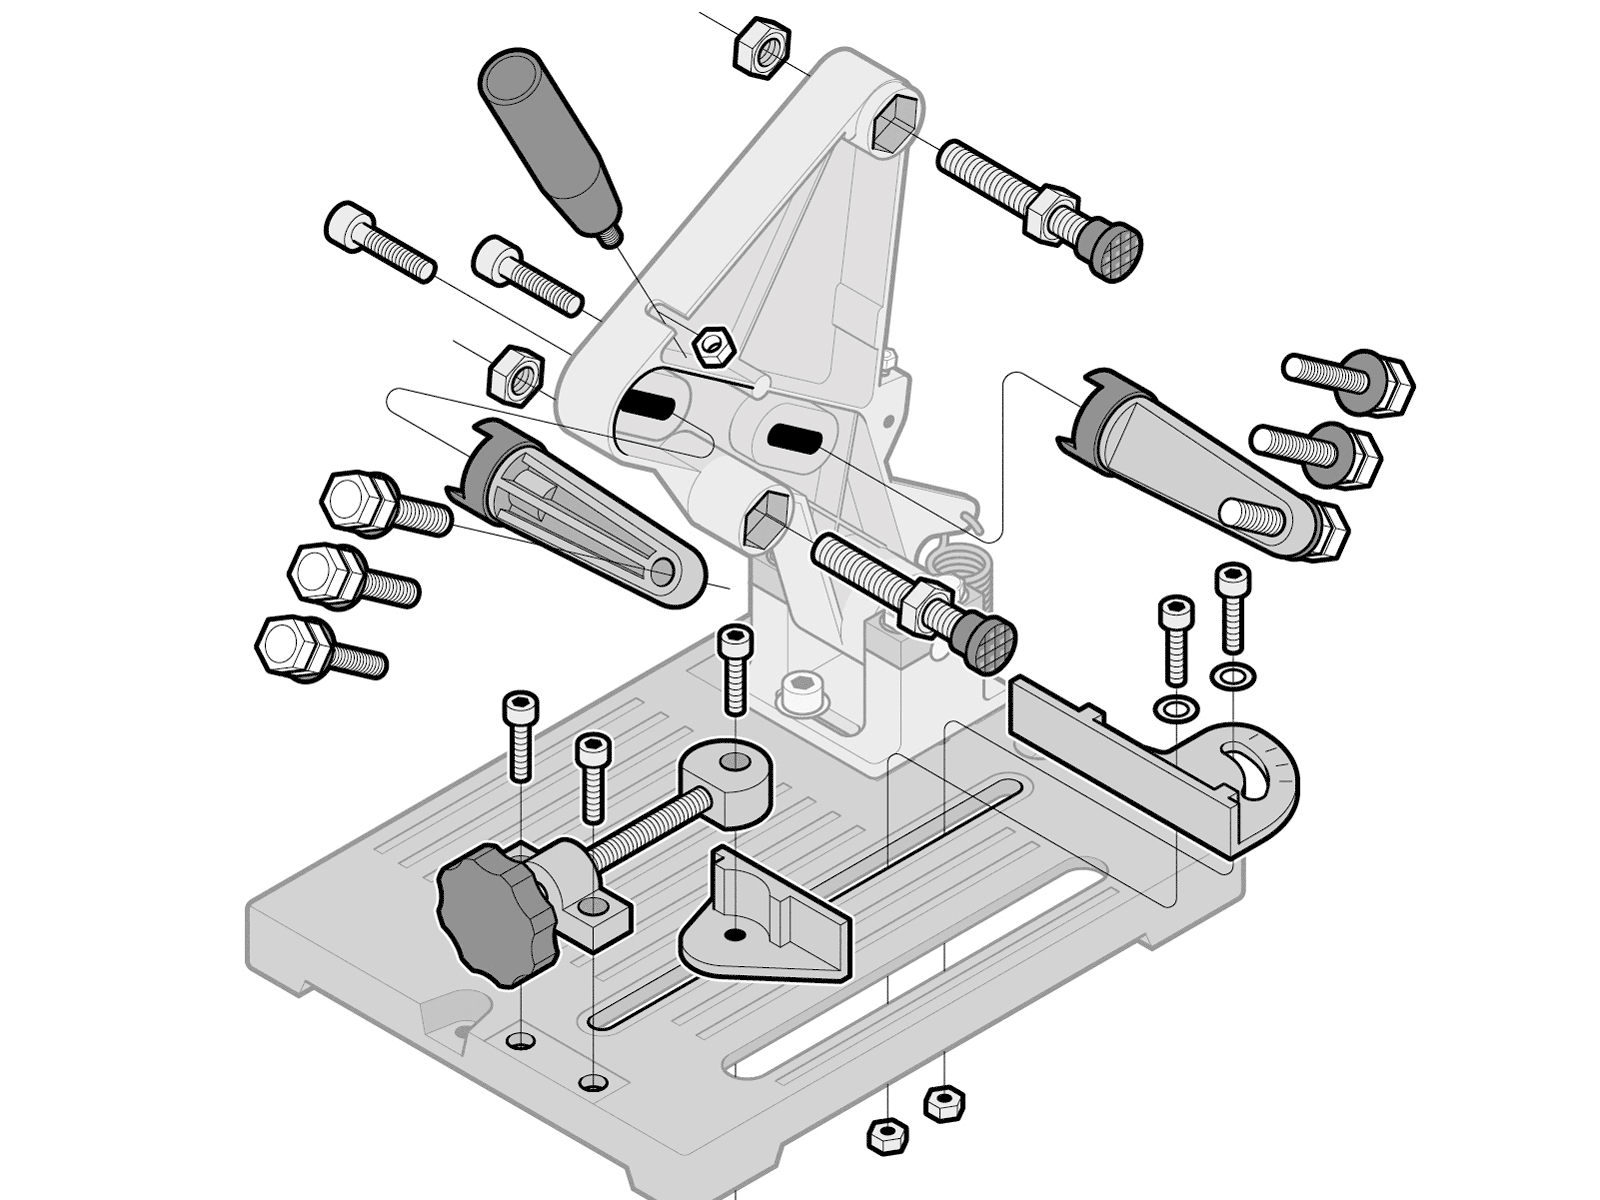 Isometric Device assembly blueprints diy exploded view fake 3d handy industrial instructional design isometric isometric art line art metal power tool tech technical drawing technical graphics technical illustration tool vector graphics